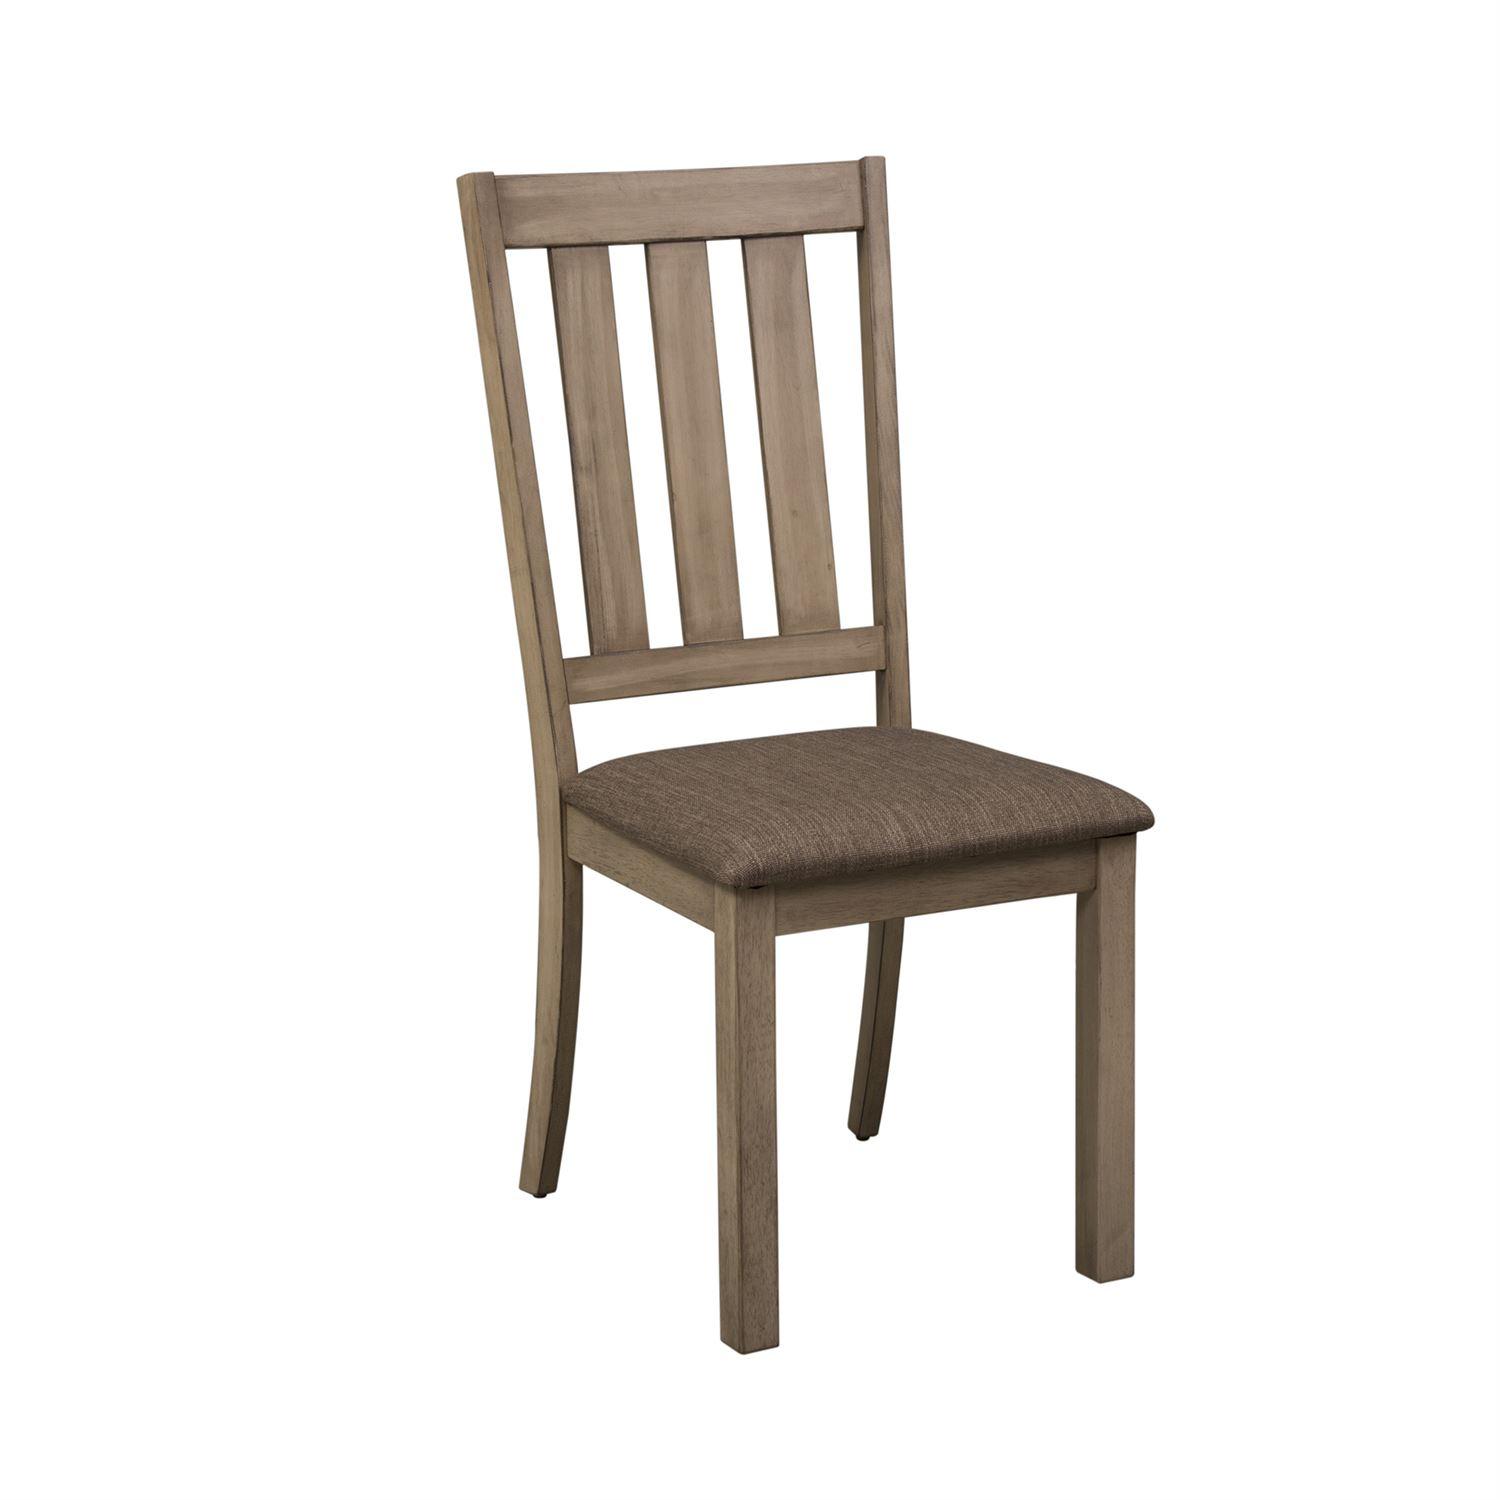 Transitional Dining Side Chair Sun Valley (439-DR) Dining Side Chair 439-C1501S-Set-2 in Beige 